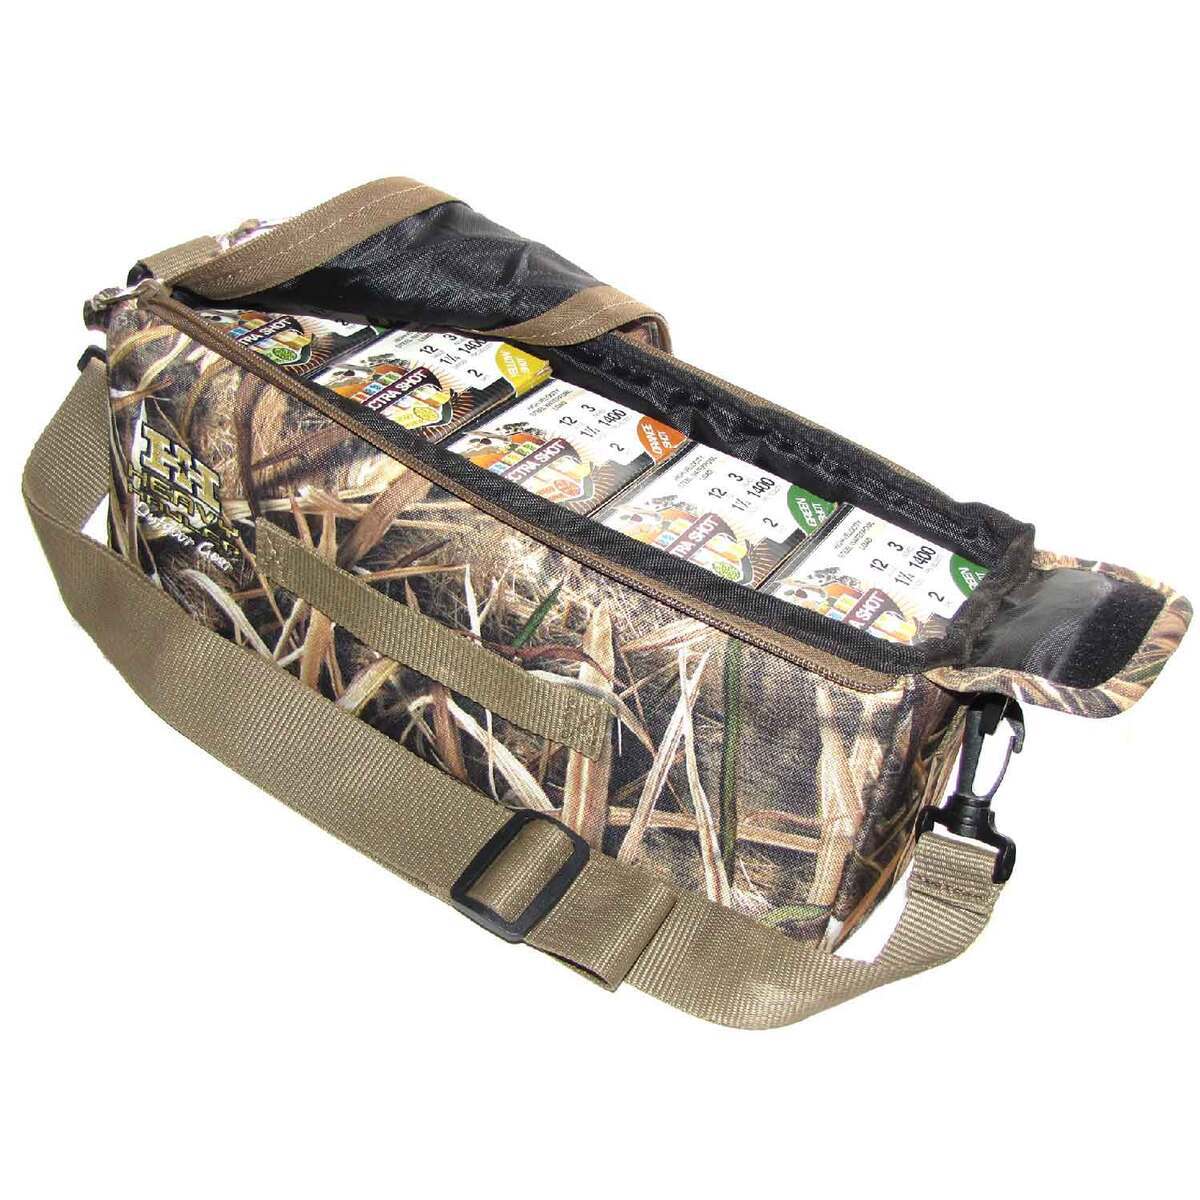 Mossy Oak Storage Crate with Dry Bag, Fishing Accessories Kit and Rod  Holder